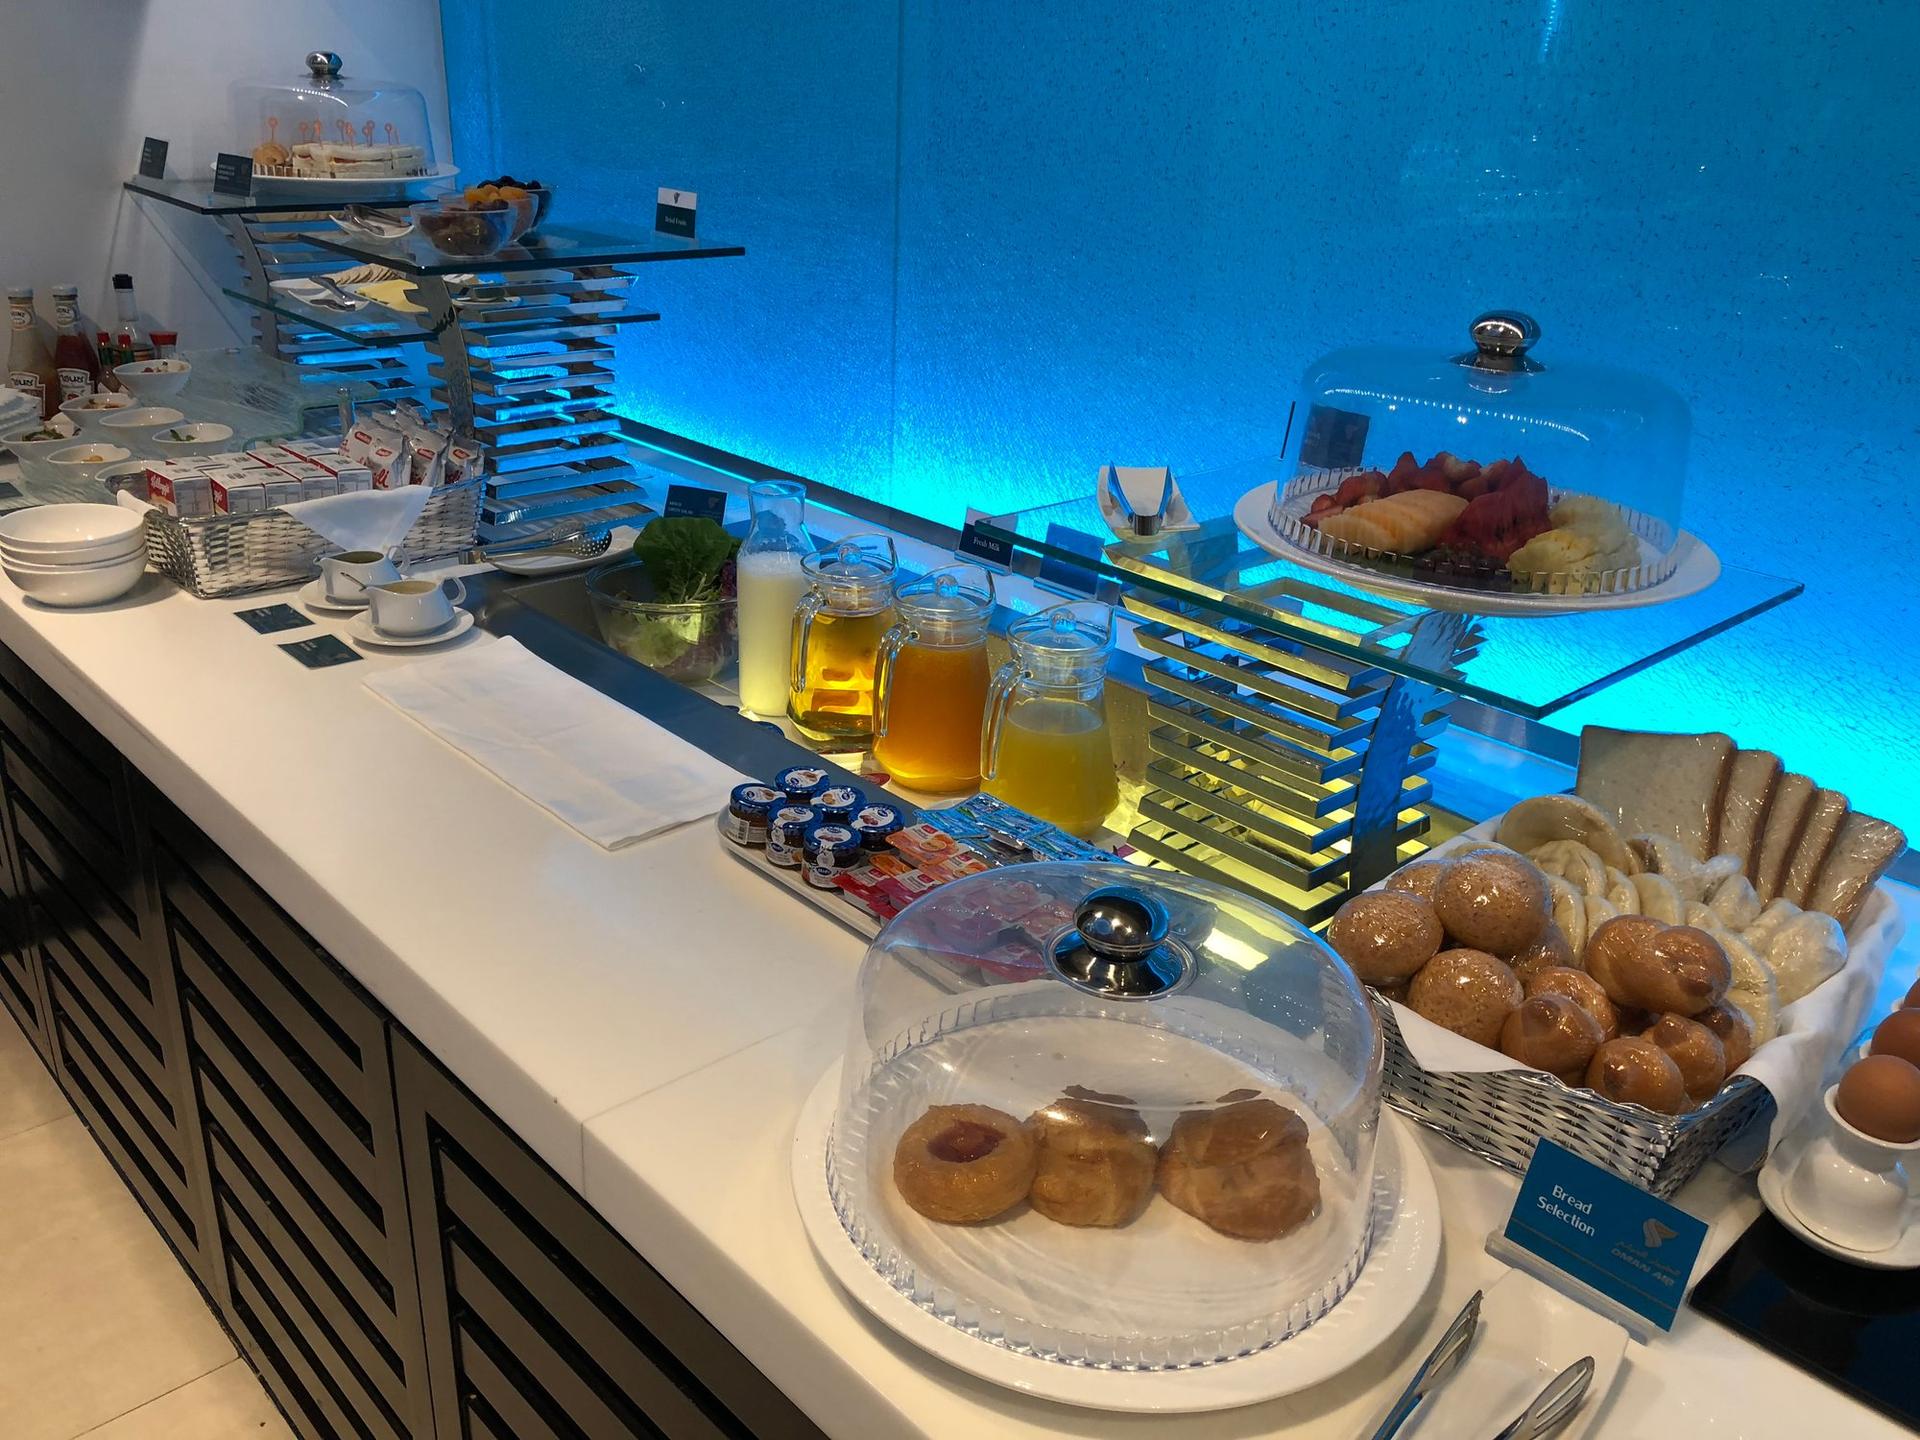 Oman Air First and Business Class Lounge image 30 of 50